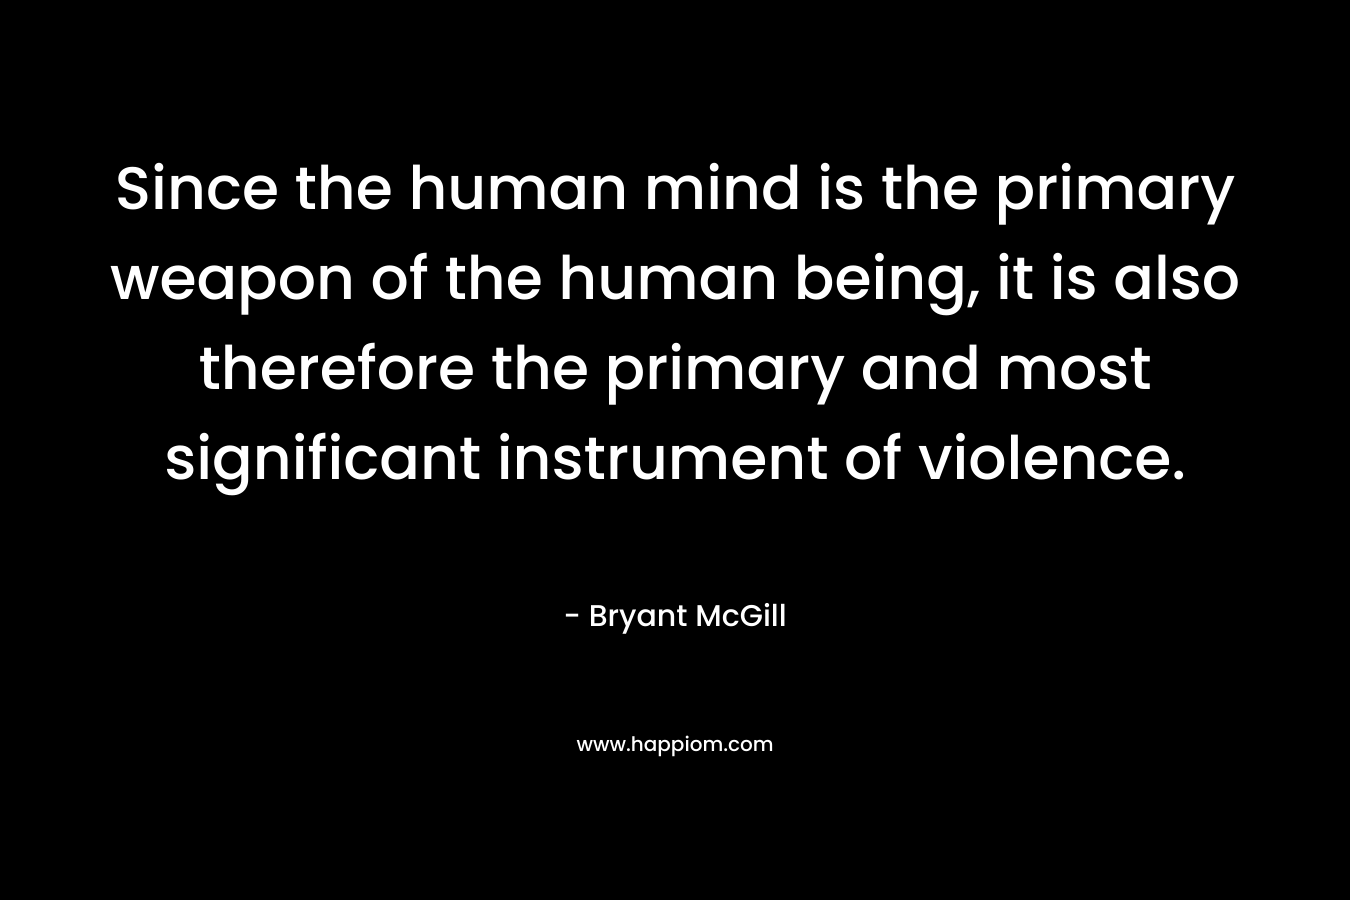 Since the human mind is the primary weapon of the human being, it is also therefore the primary and most significant instrument of violence. – Bryant McGill